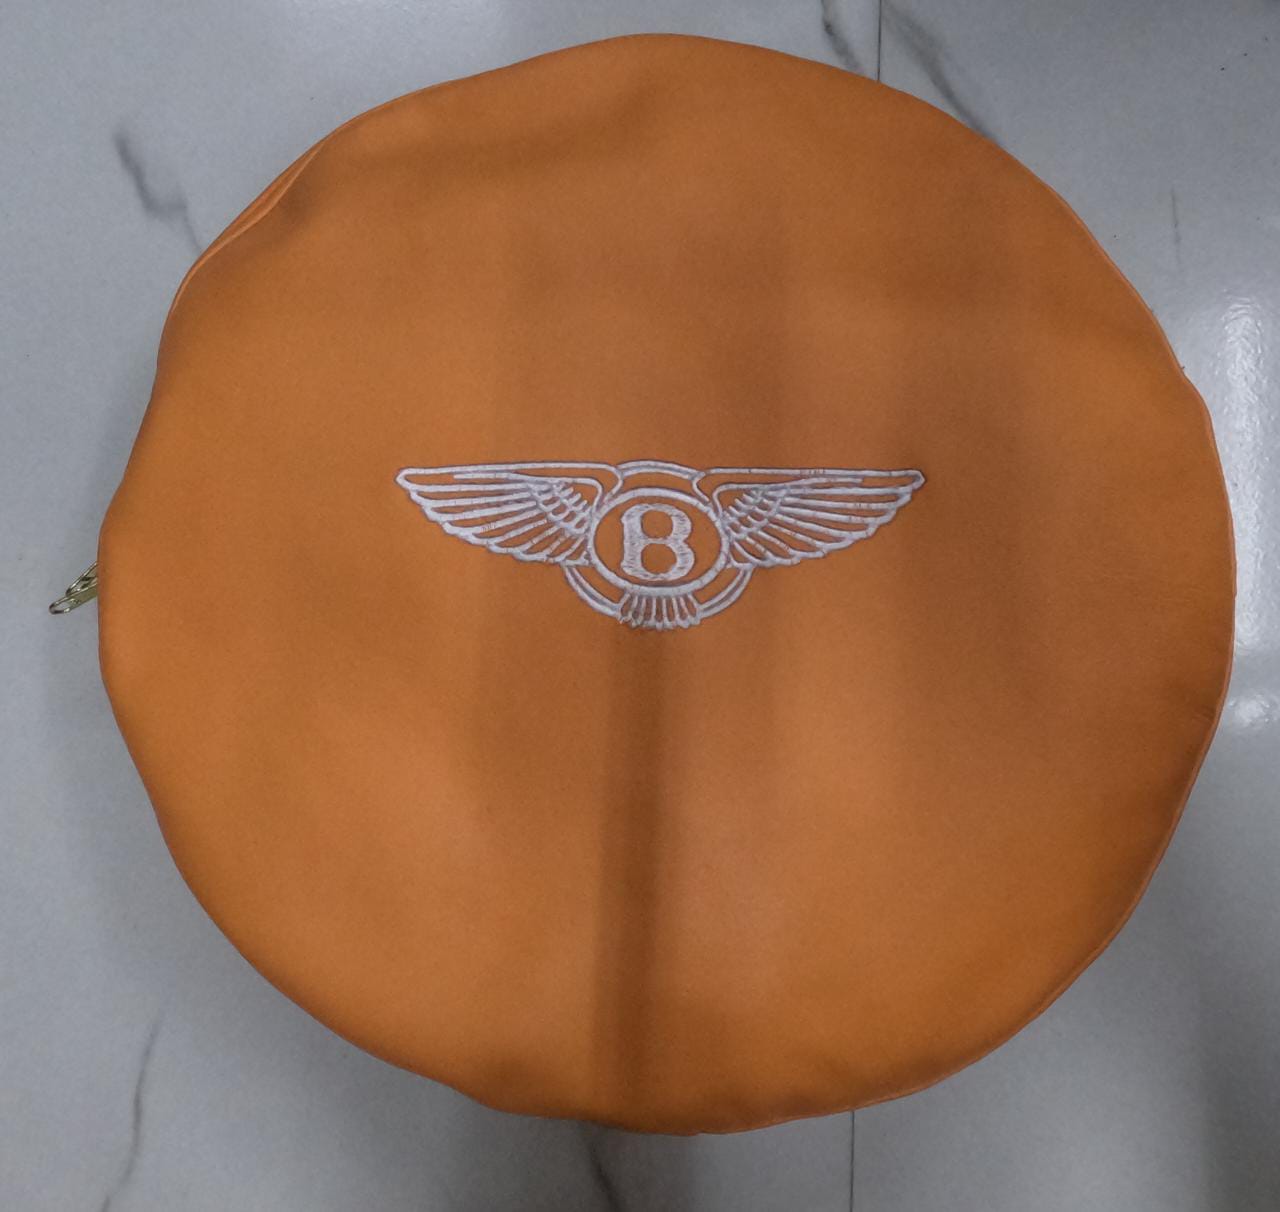 Noora Lambskin Leather Orange Round Pillow Cover | Luxury Covers | Embroidery With White Threads Logo | Housewarming Cushion Cover |  JS38